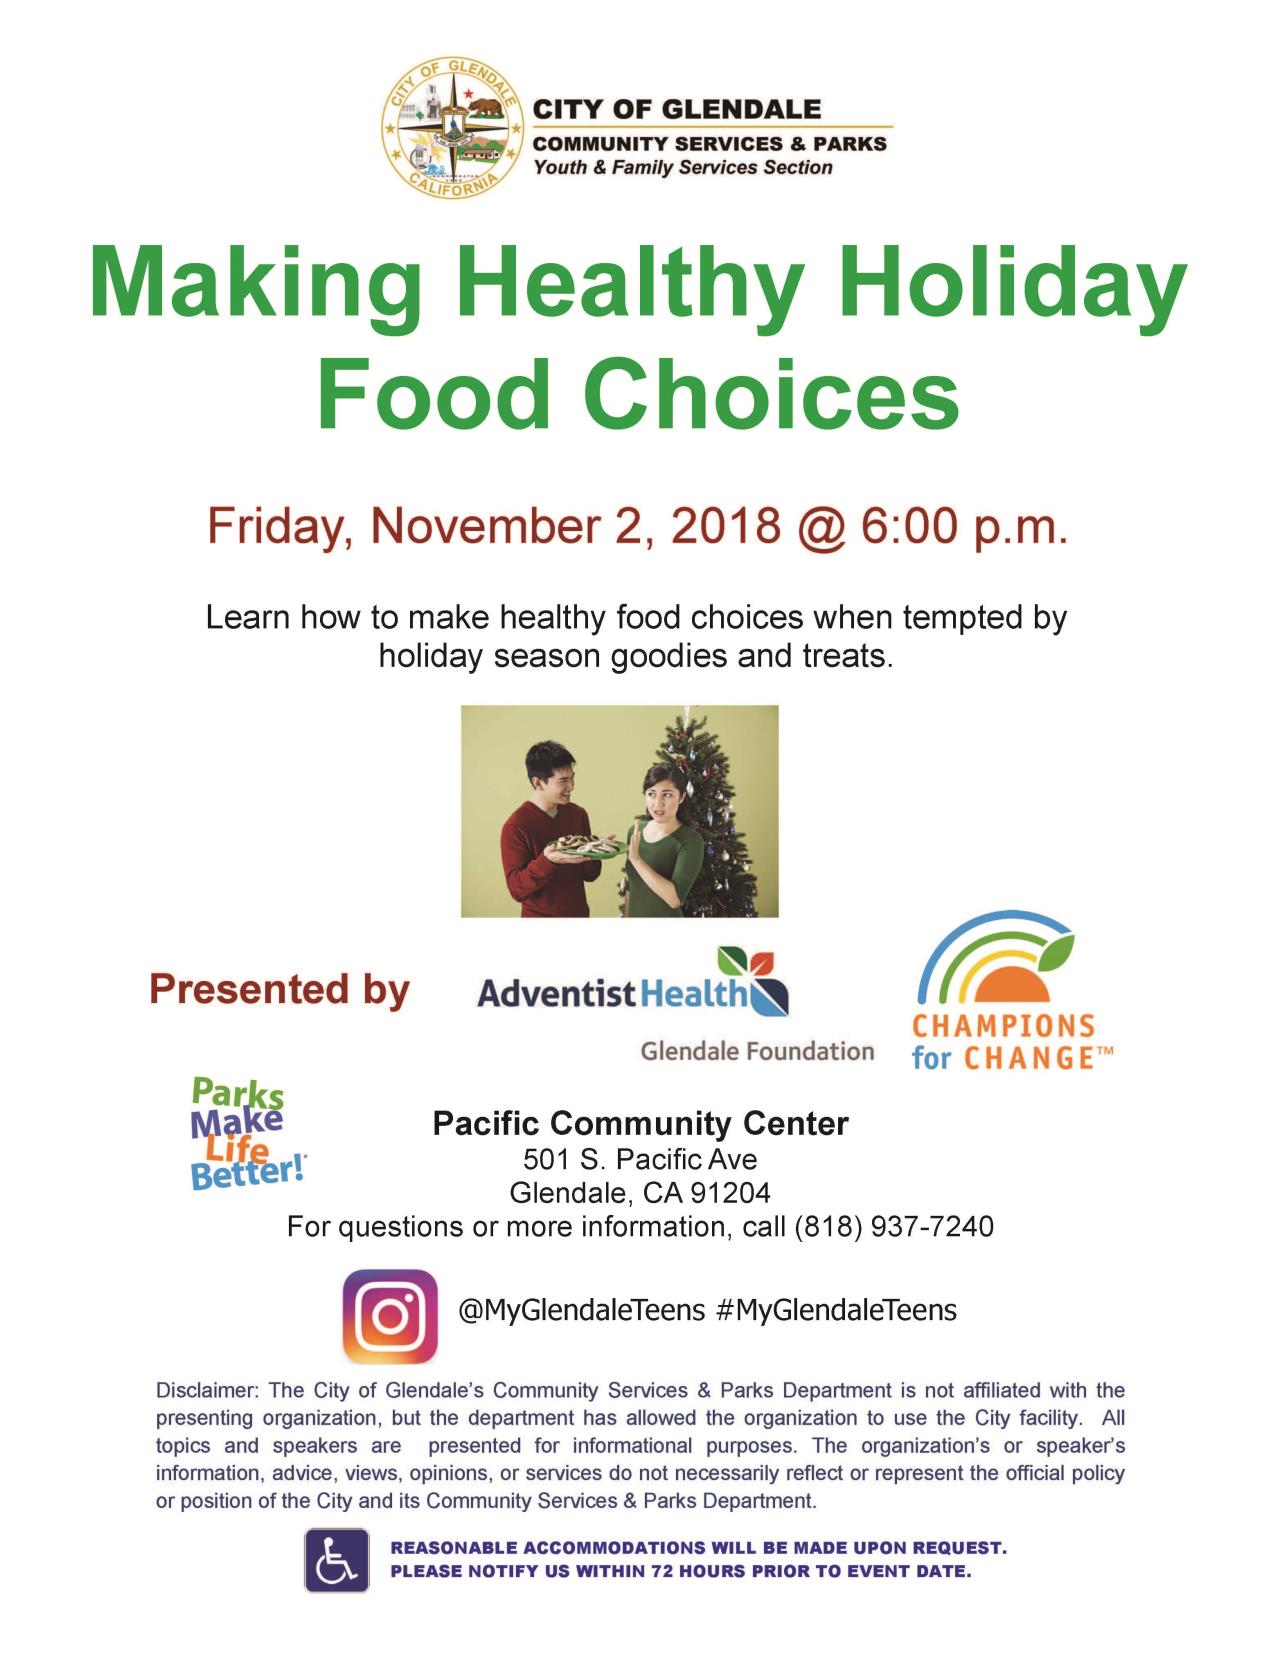 Holiday Healthy Food Choices 2018